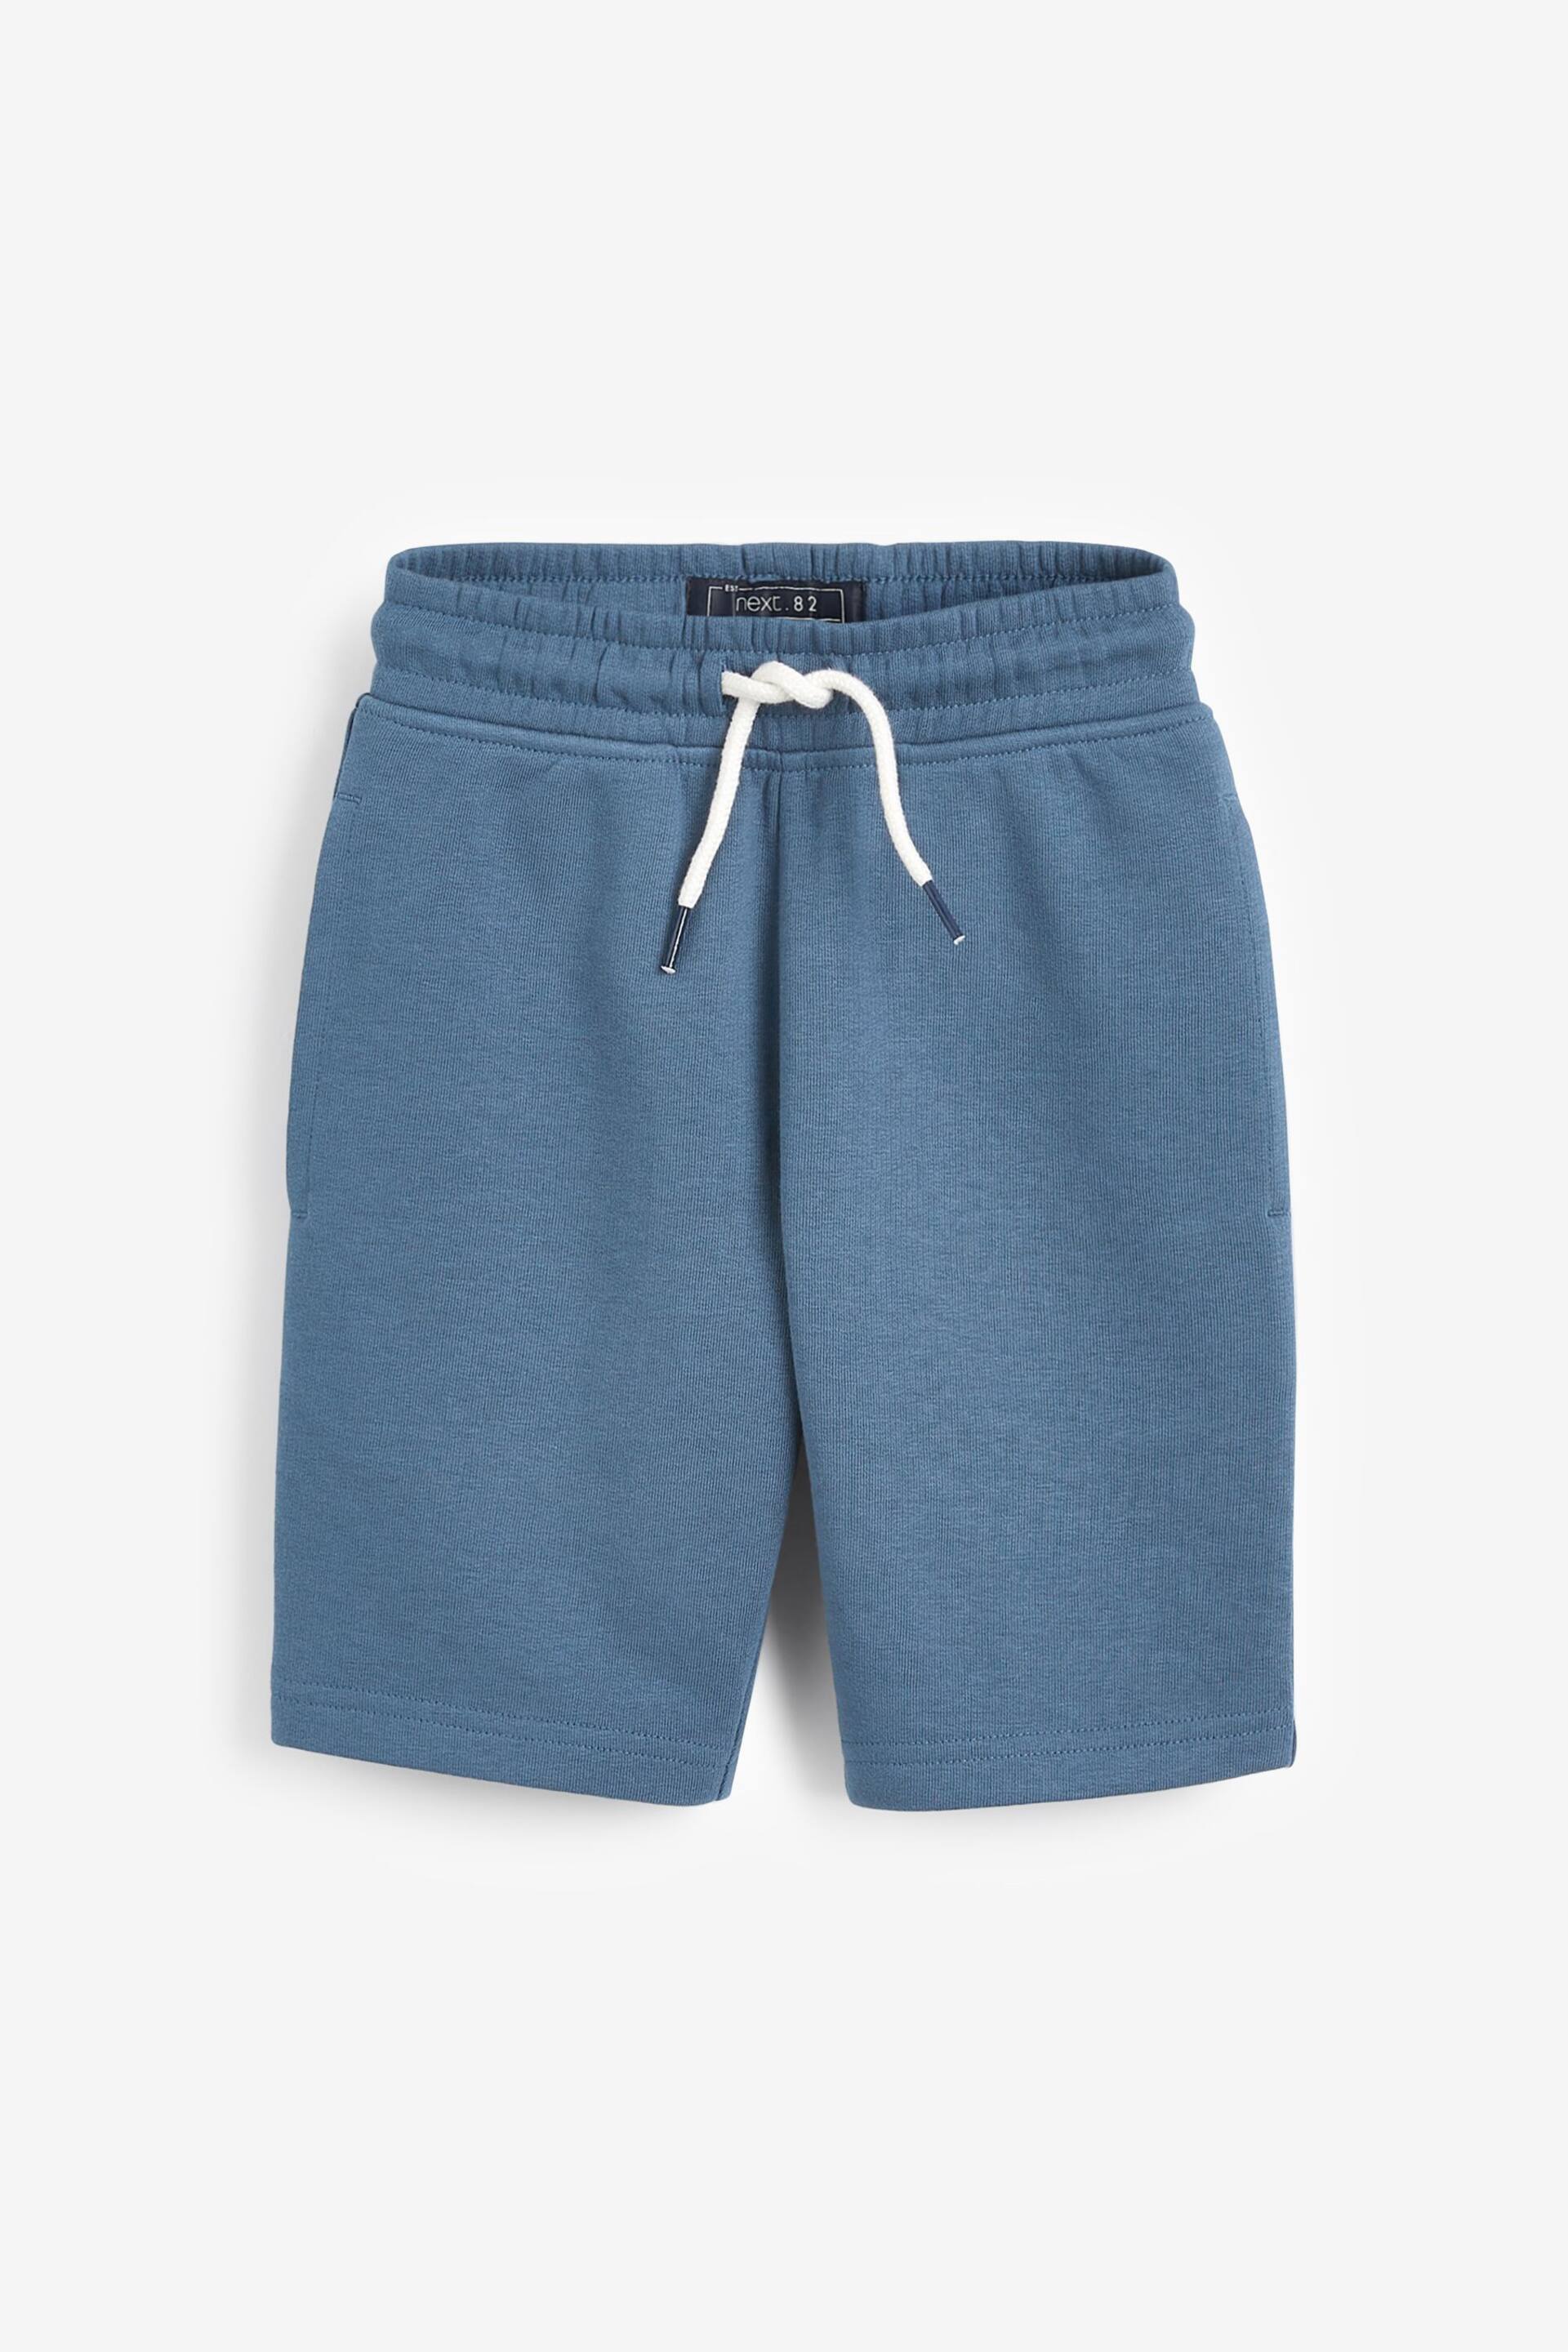 Blue/Grey 2 Pack Shorts (3-16yrs) - Image 2 of 5